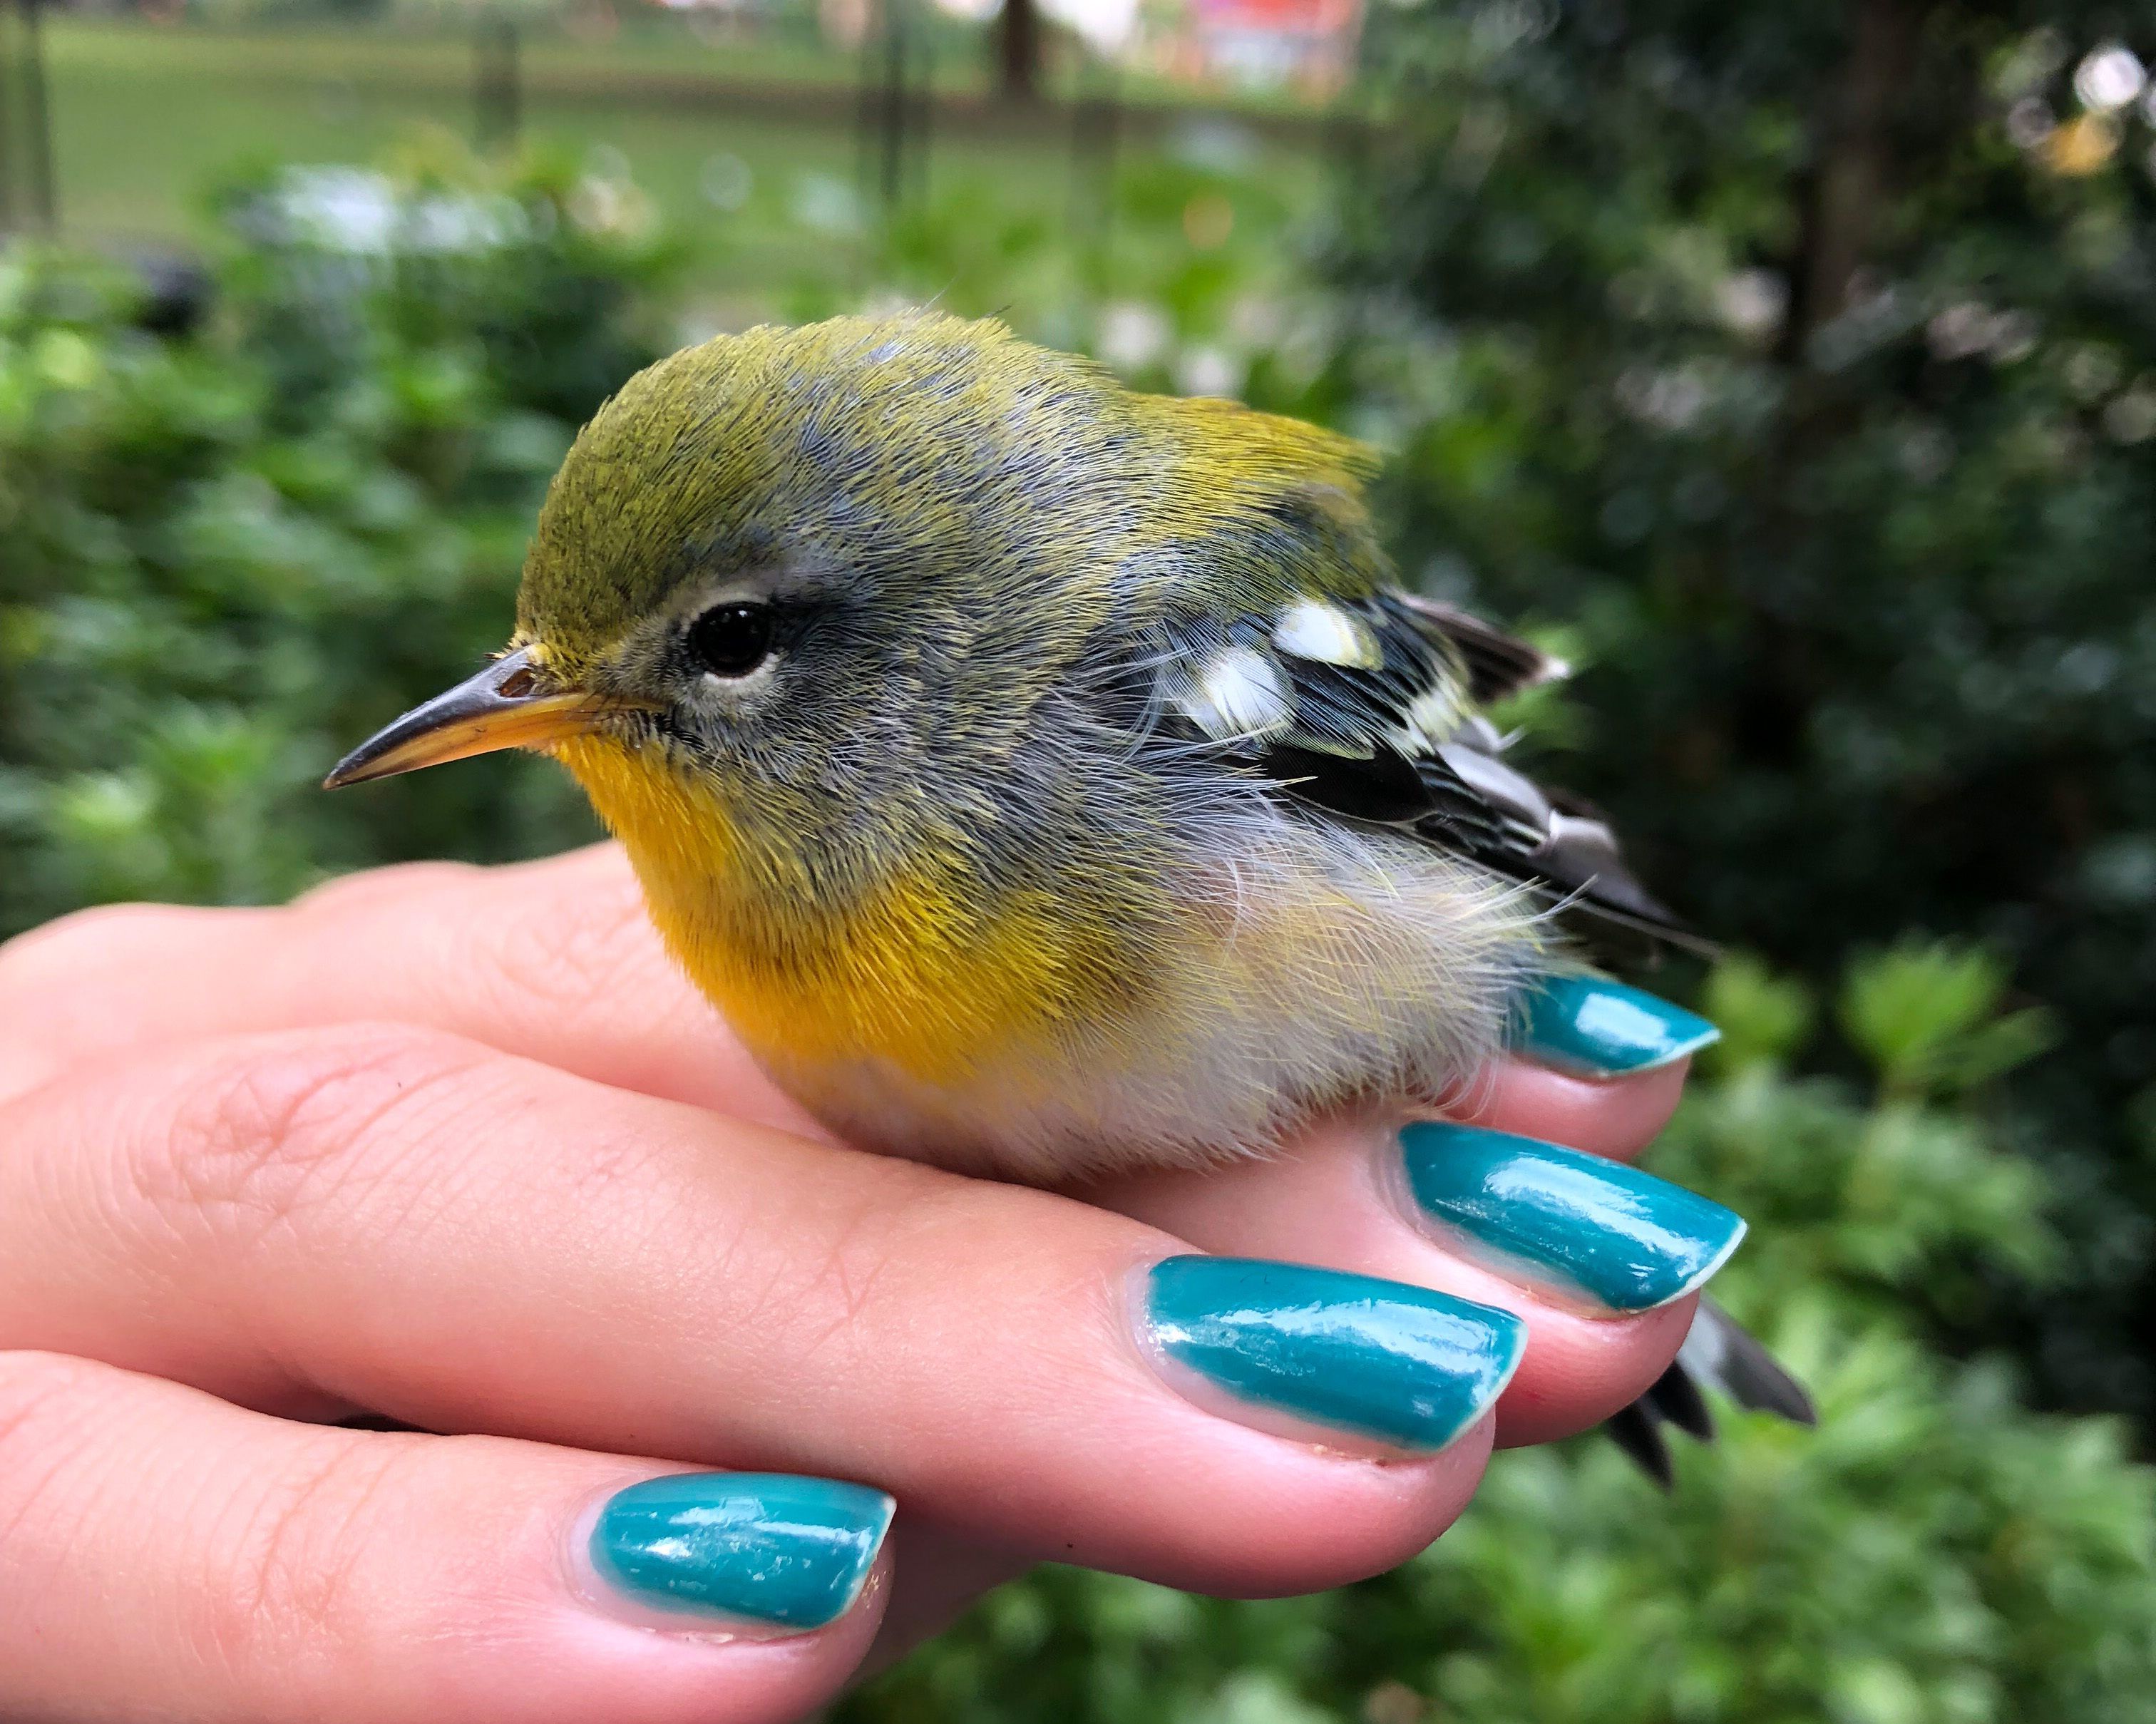 This Northern Parula was found stunned in Manhattan’s Flatiron District. Senior Conservation Biologist Kaitlyn Parkins helped it safely recover at the office before releasing it back into the wild in Madison Square Park, pictured here. Photo: NYC Audubon